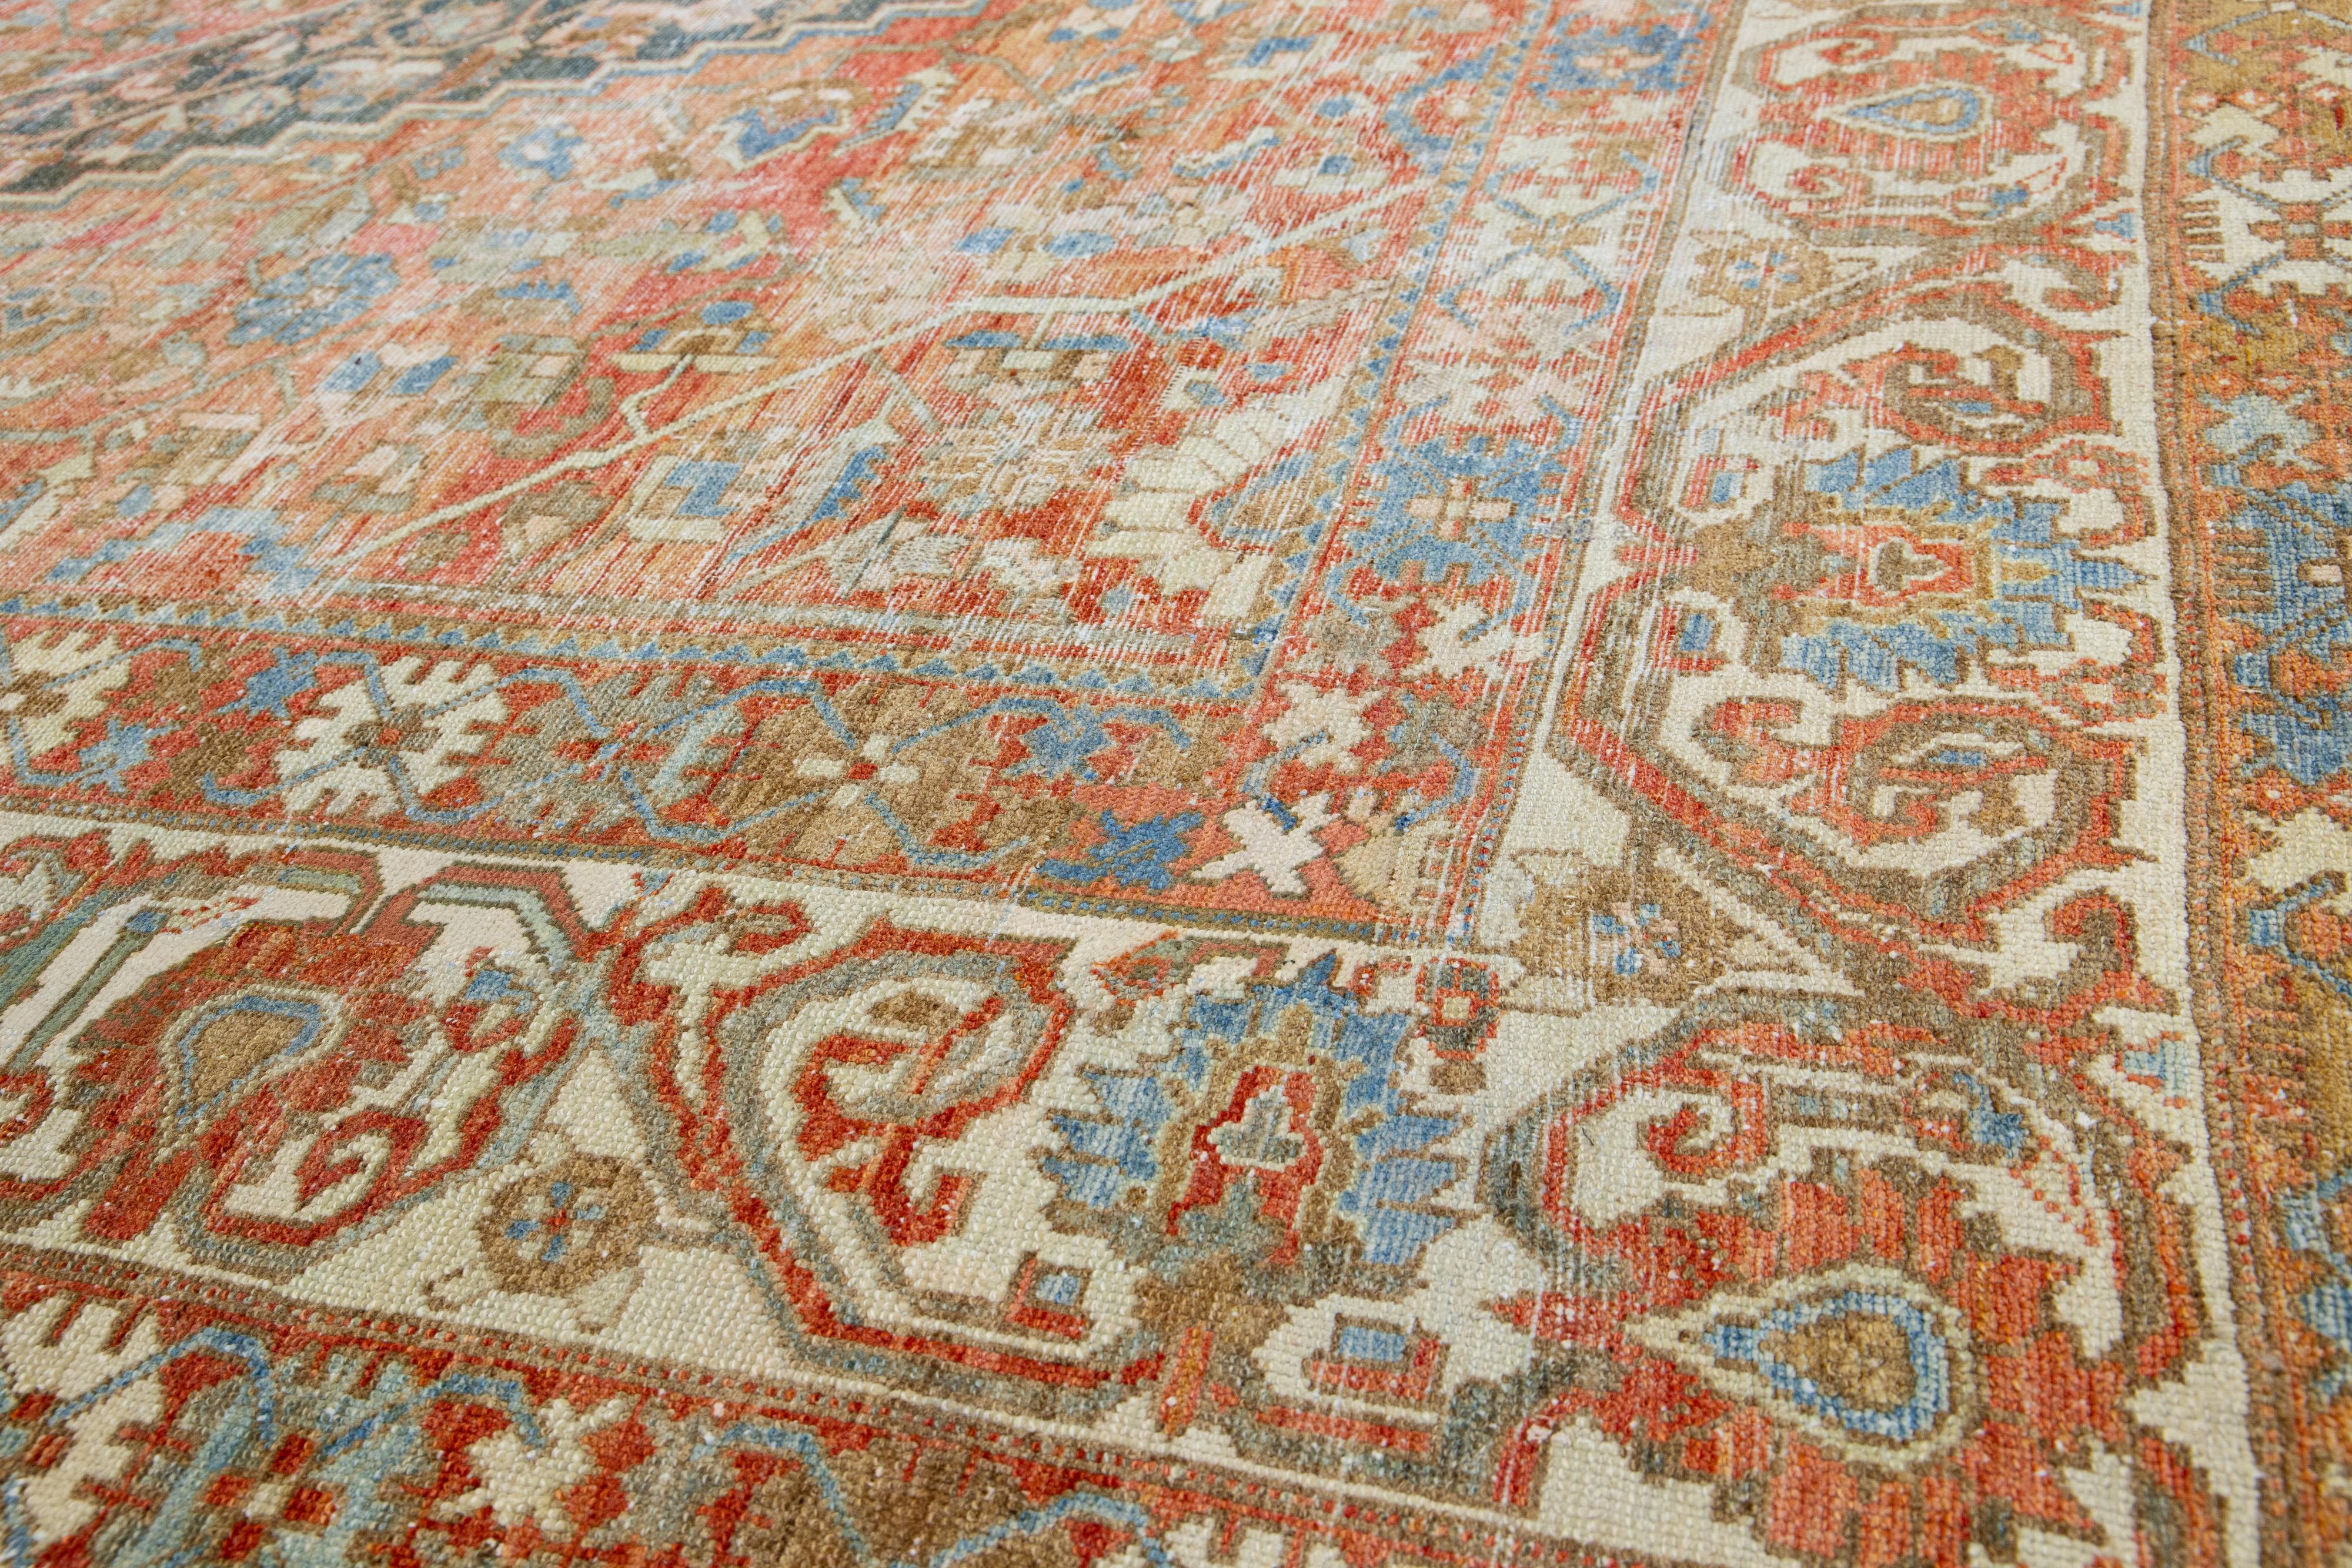 Allover 1900s Antique Persian Bakhtiari Wool Rug In Rust Color  For Sale 3